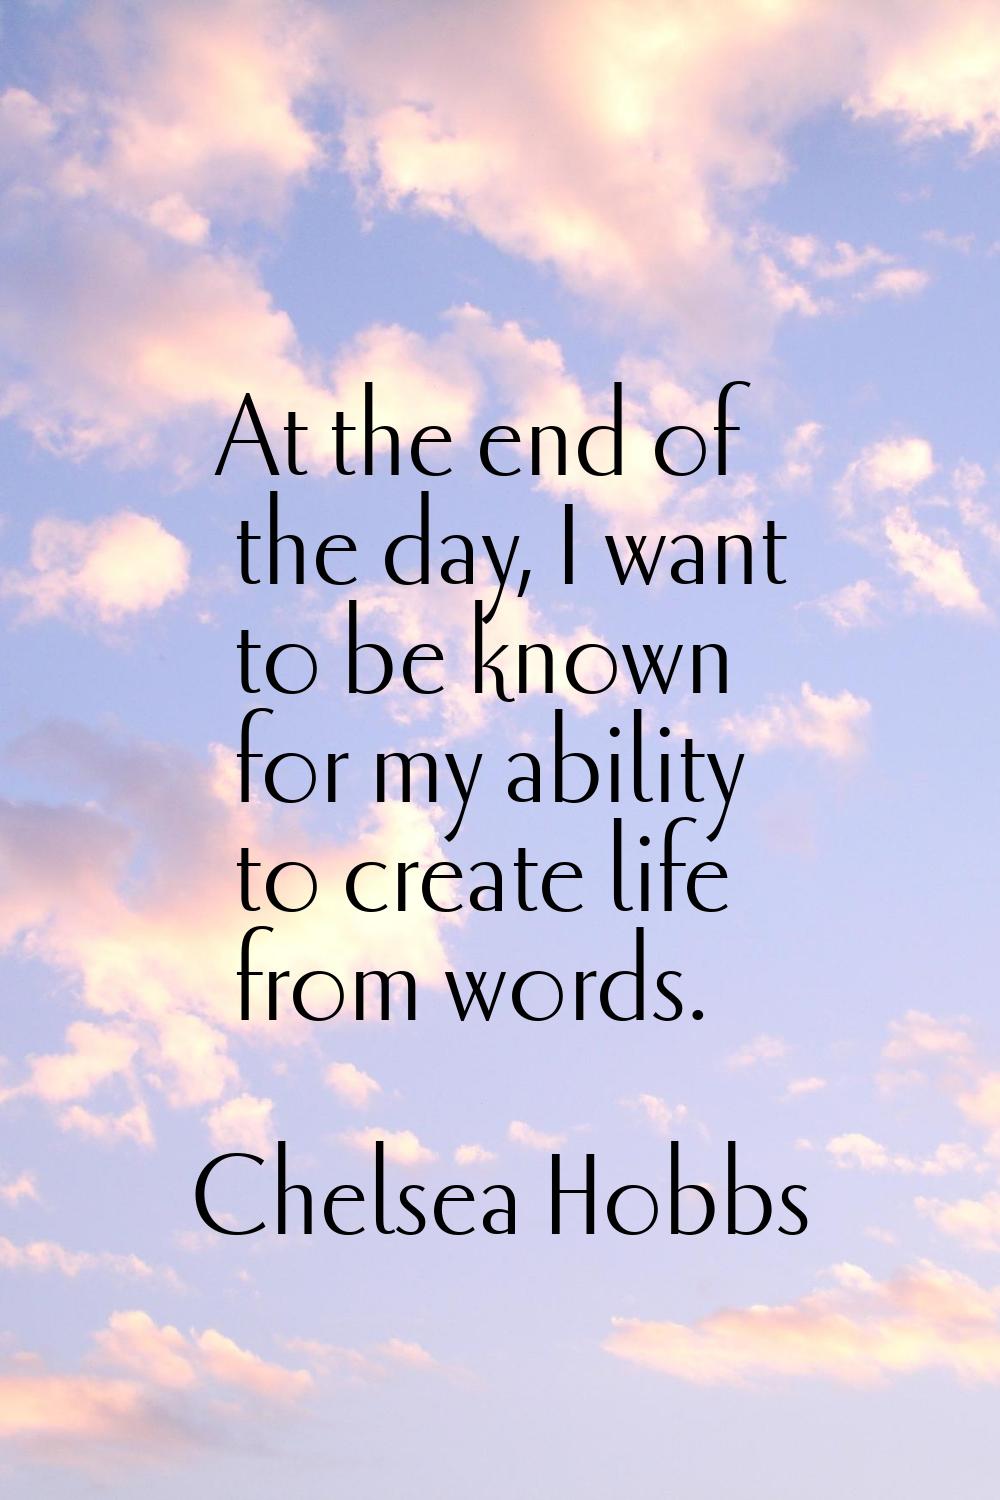 At the end of the day, I want to be known for my ability to create life from words.